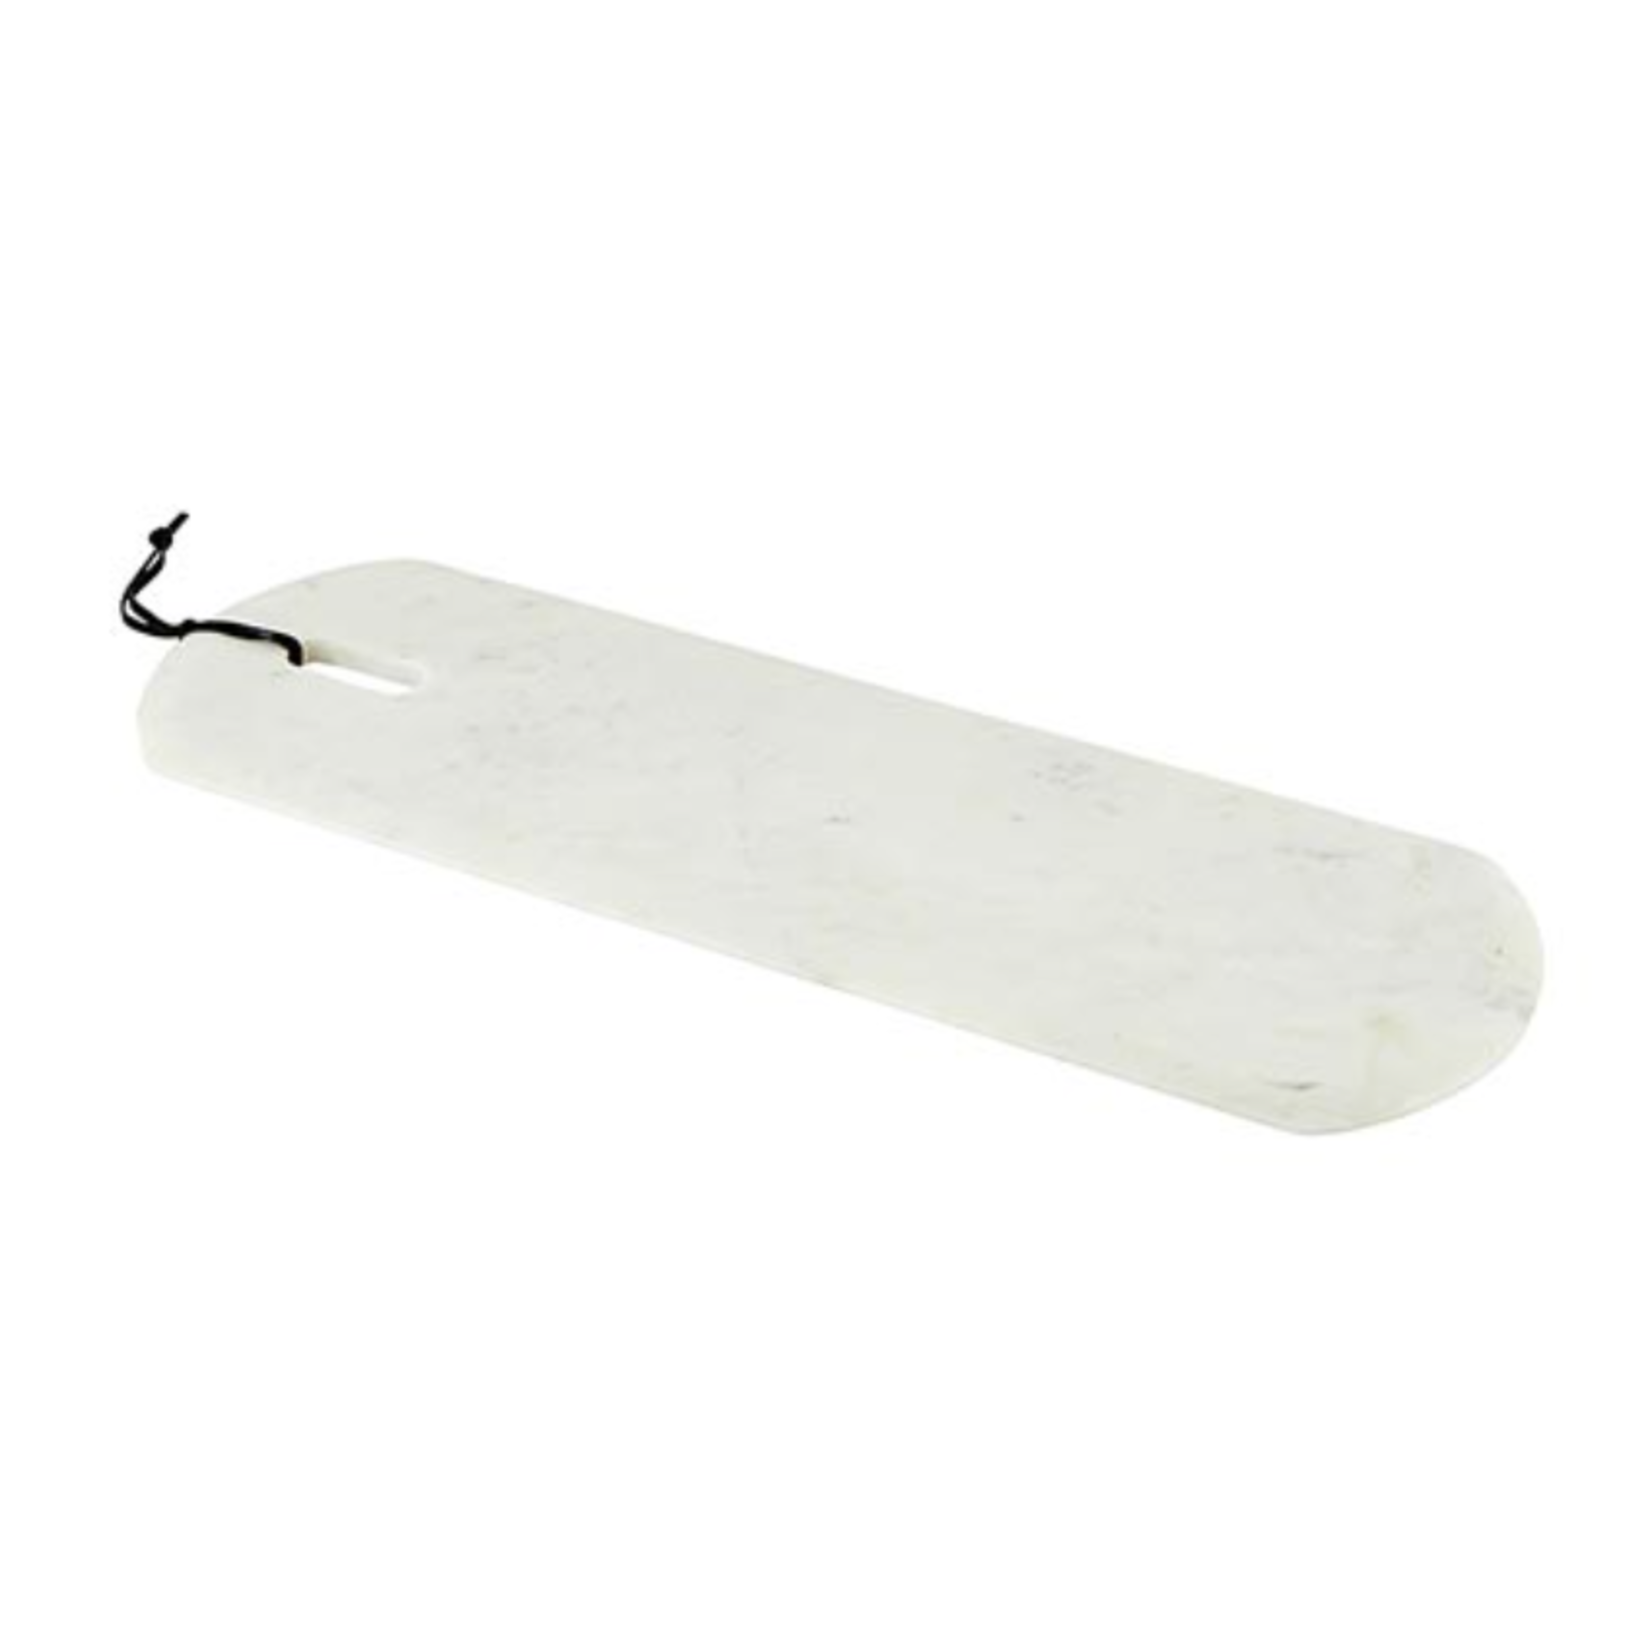 Outside The Box 24" White Marble Board / Tray